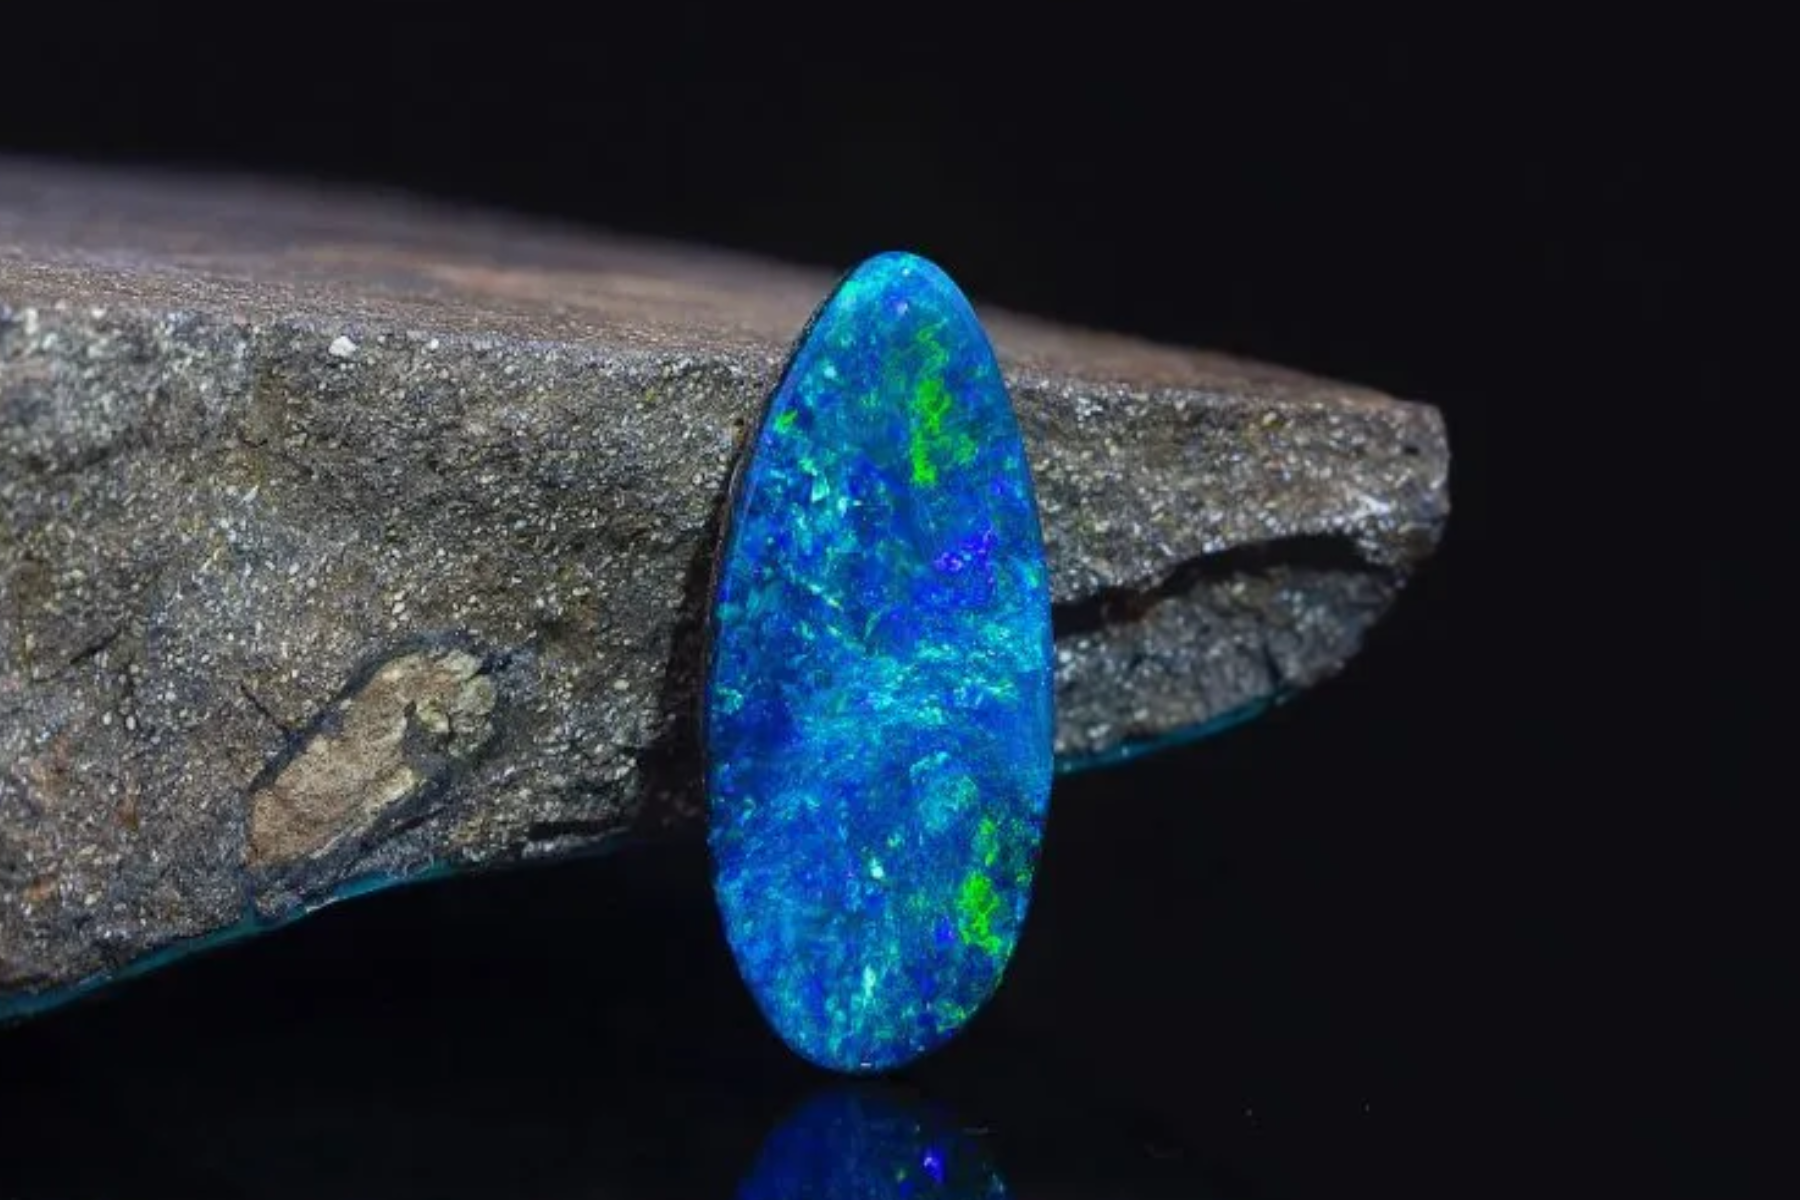 A photograph of an opal stone resting on a rock